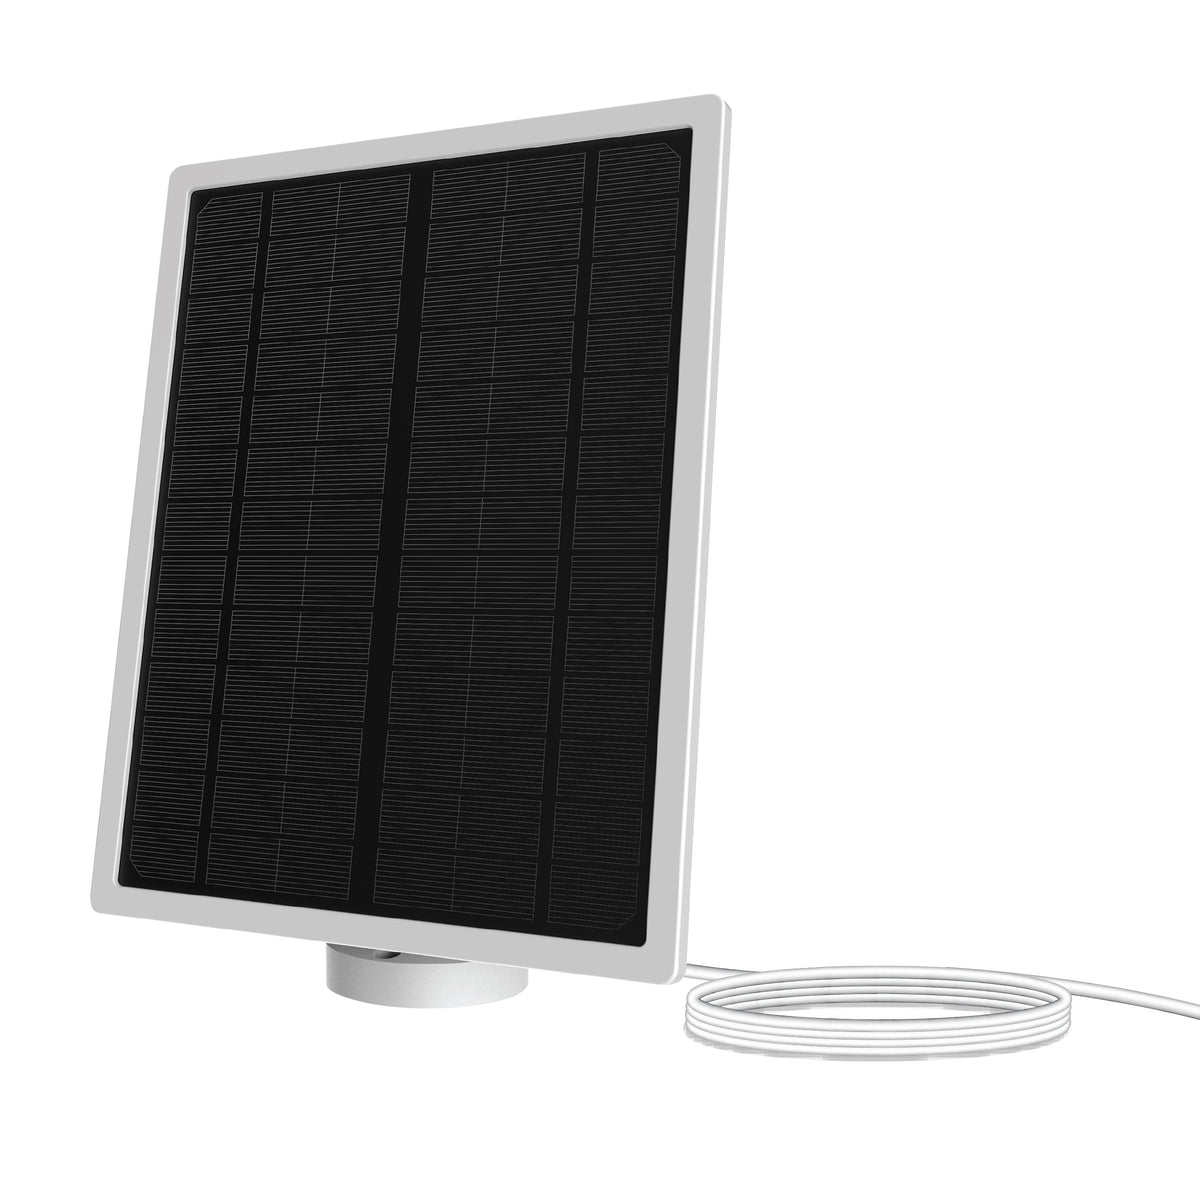 Feit Electric PANEL/SOL/CAM Camera Solar Panel Charger, Black, 3 Watts